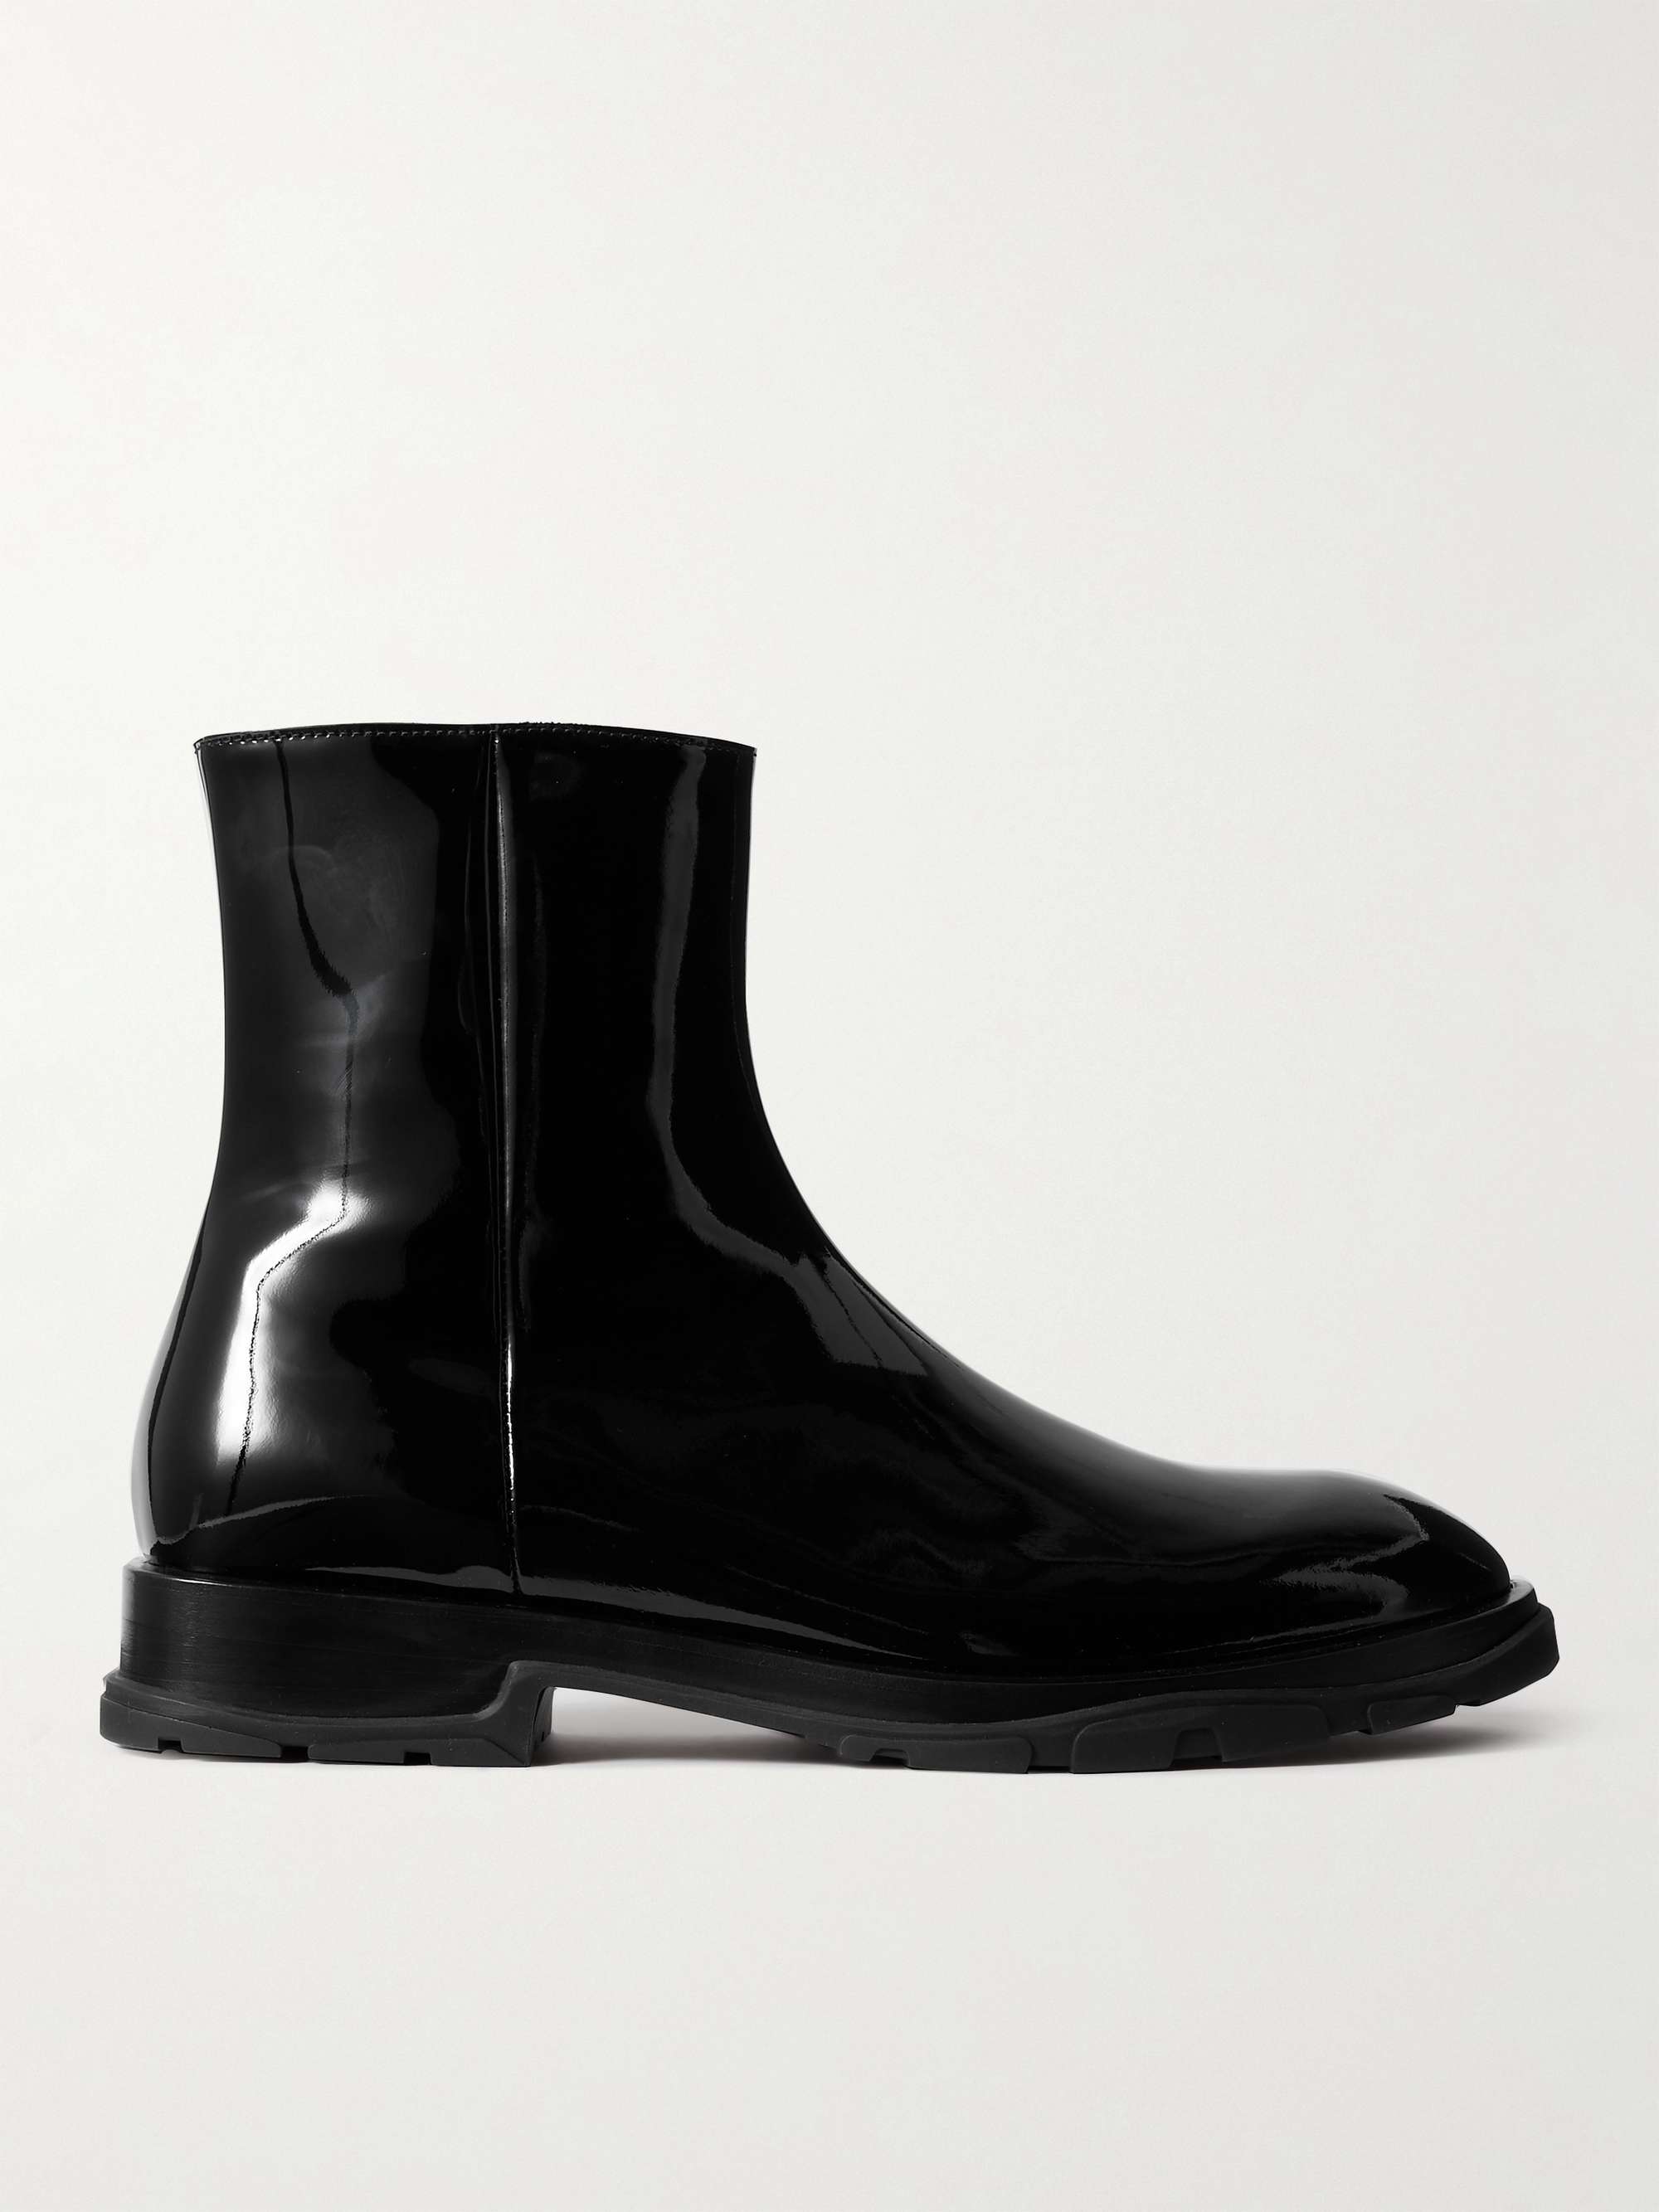 ALEXANDER MCQUEEN Patent-Leather Ankle Boots | MR PORTER